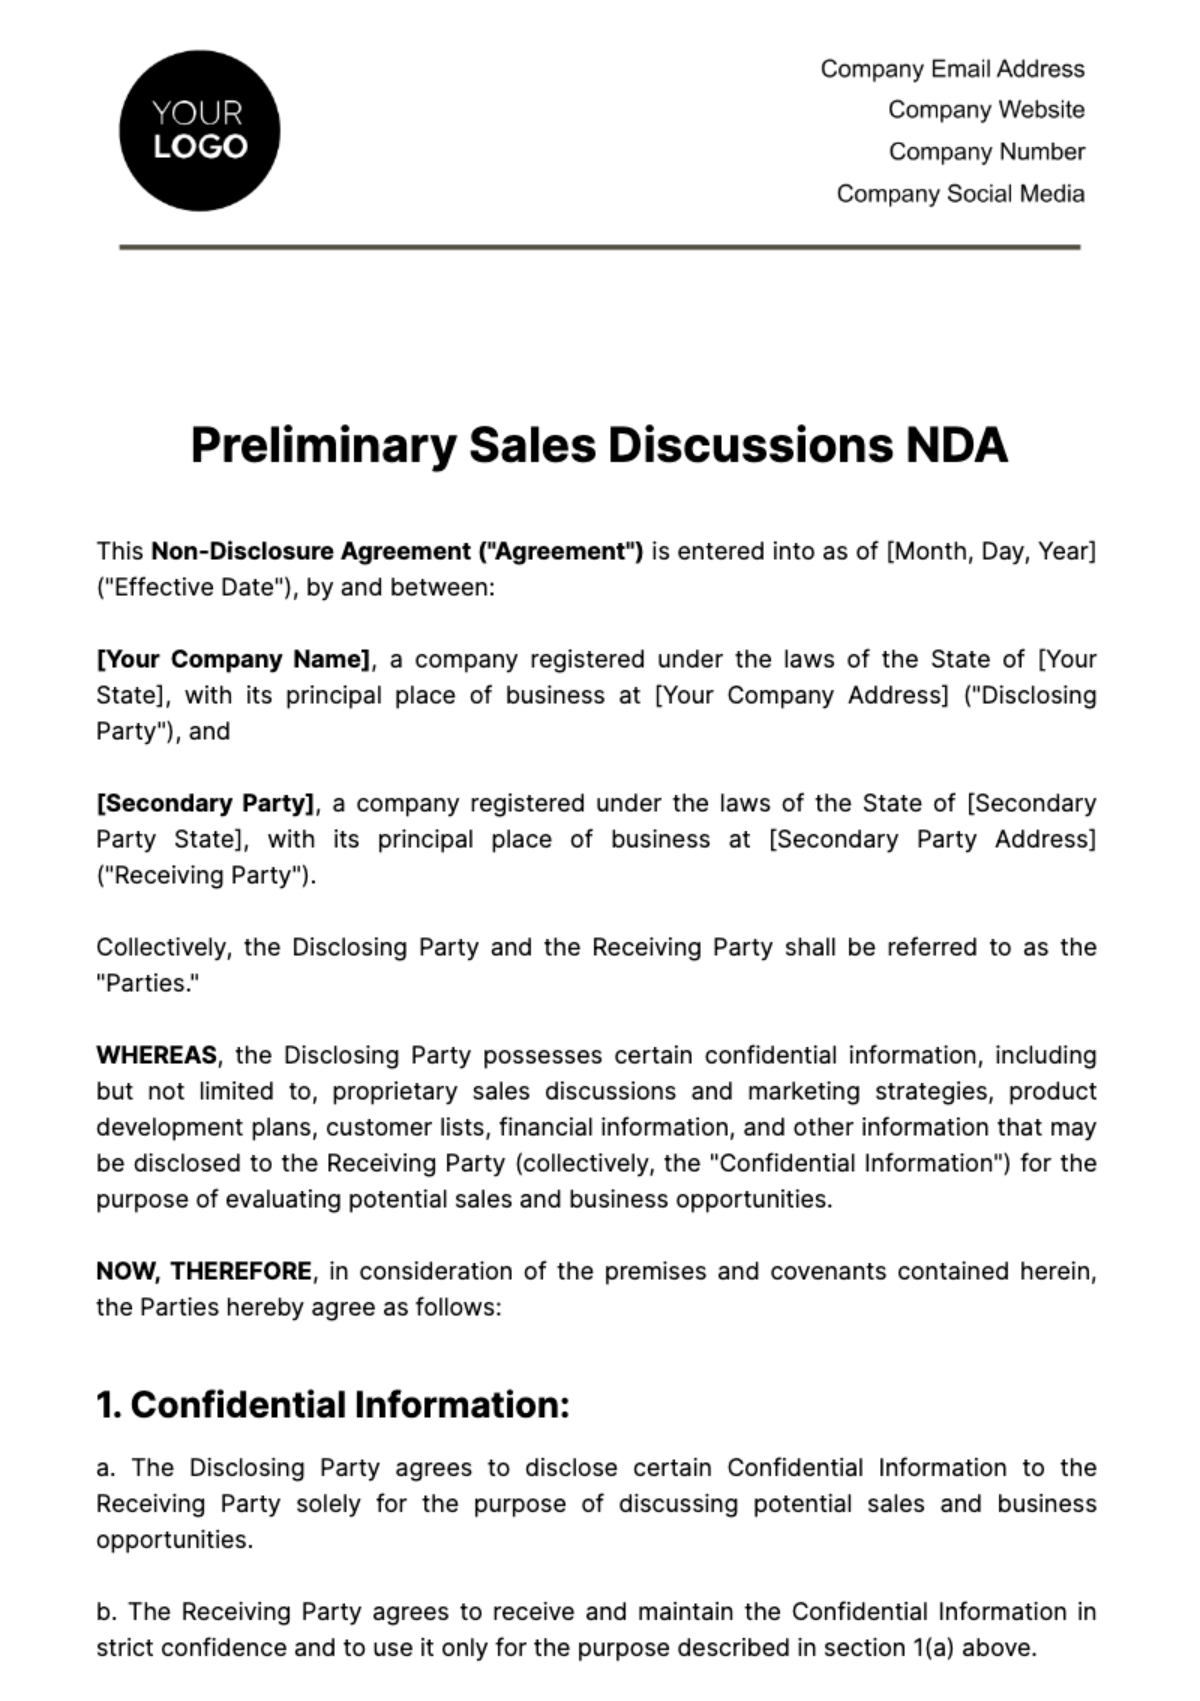 Preliminary Sales Discussions NDA Template